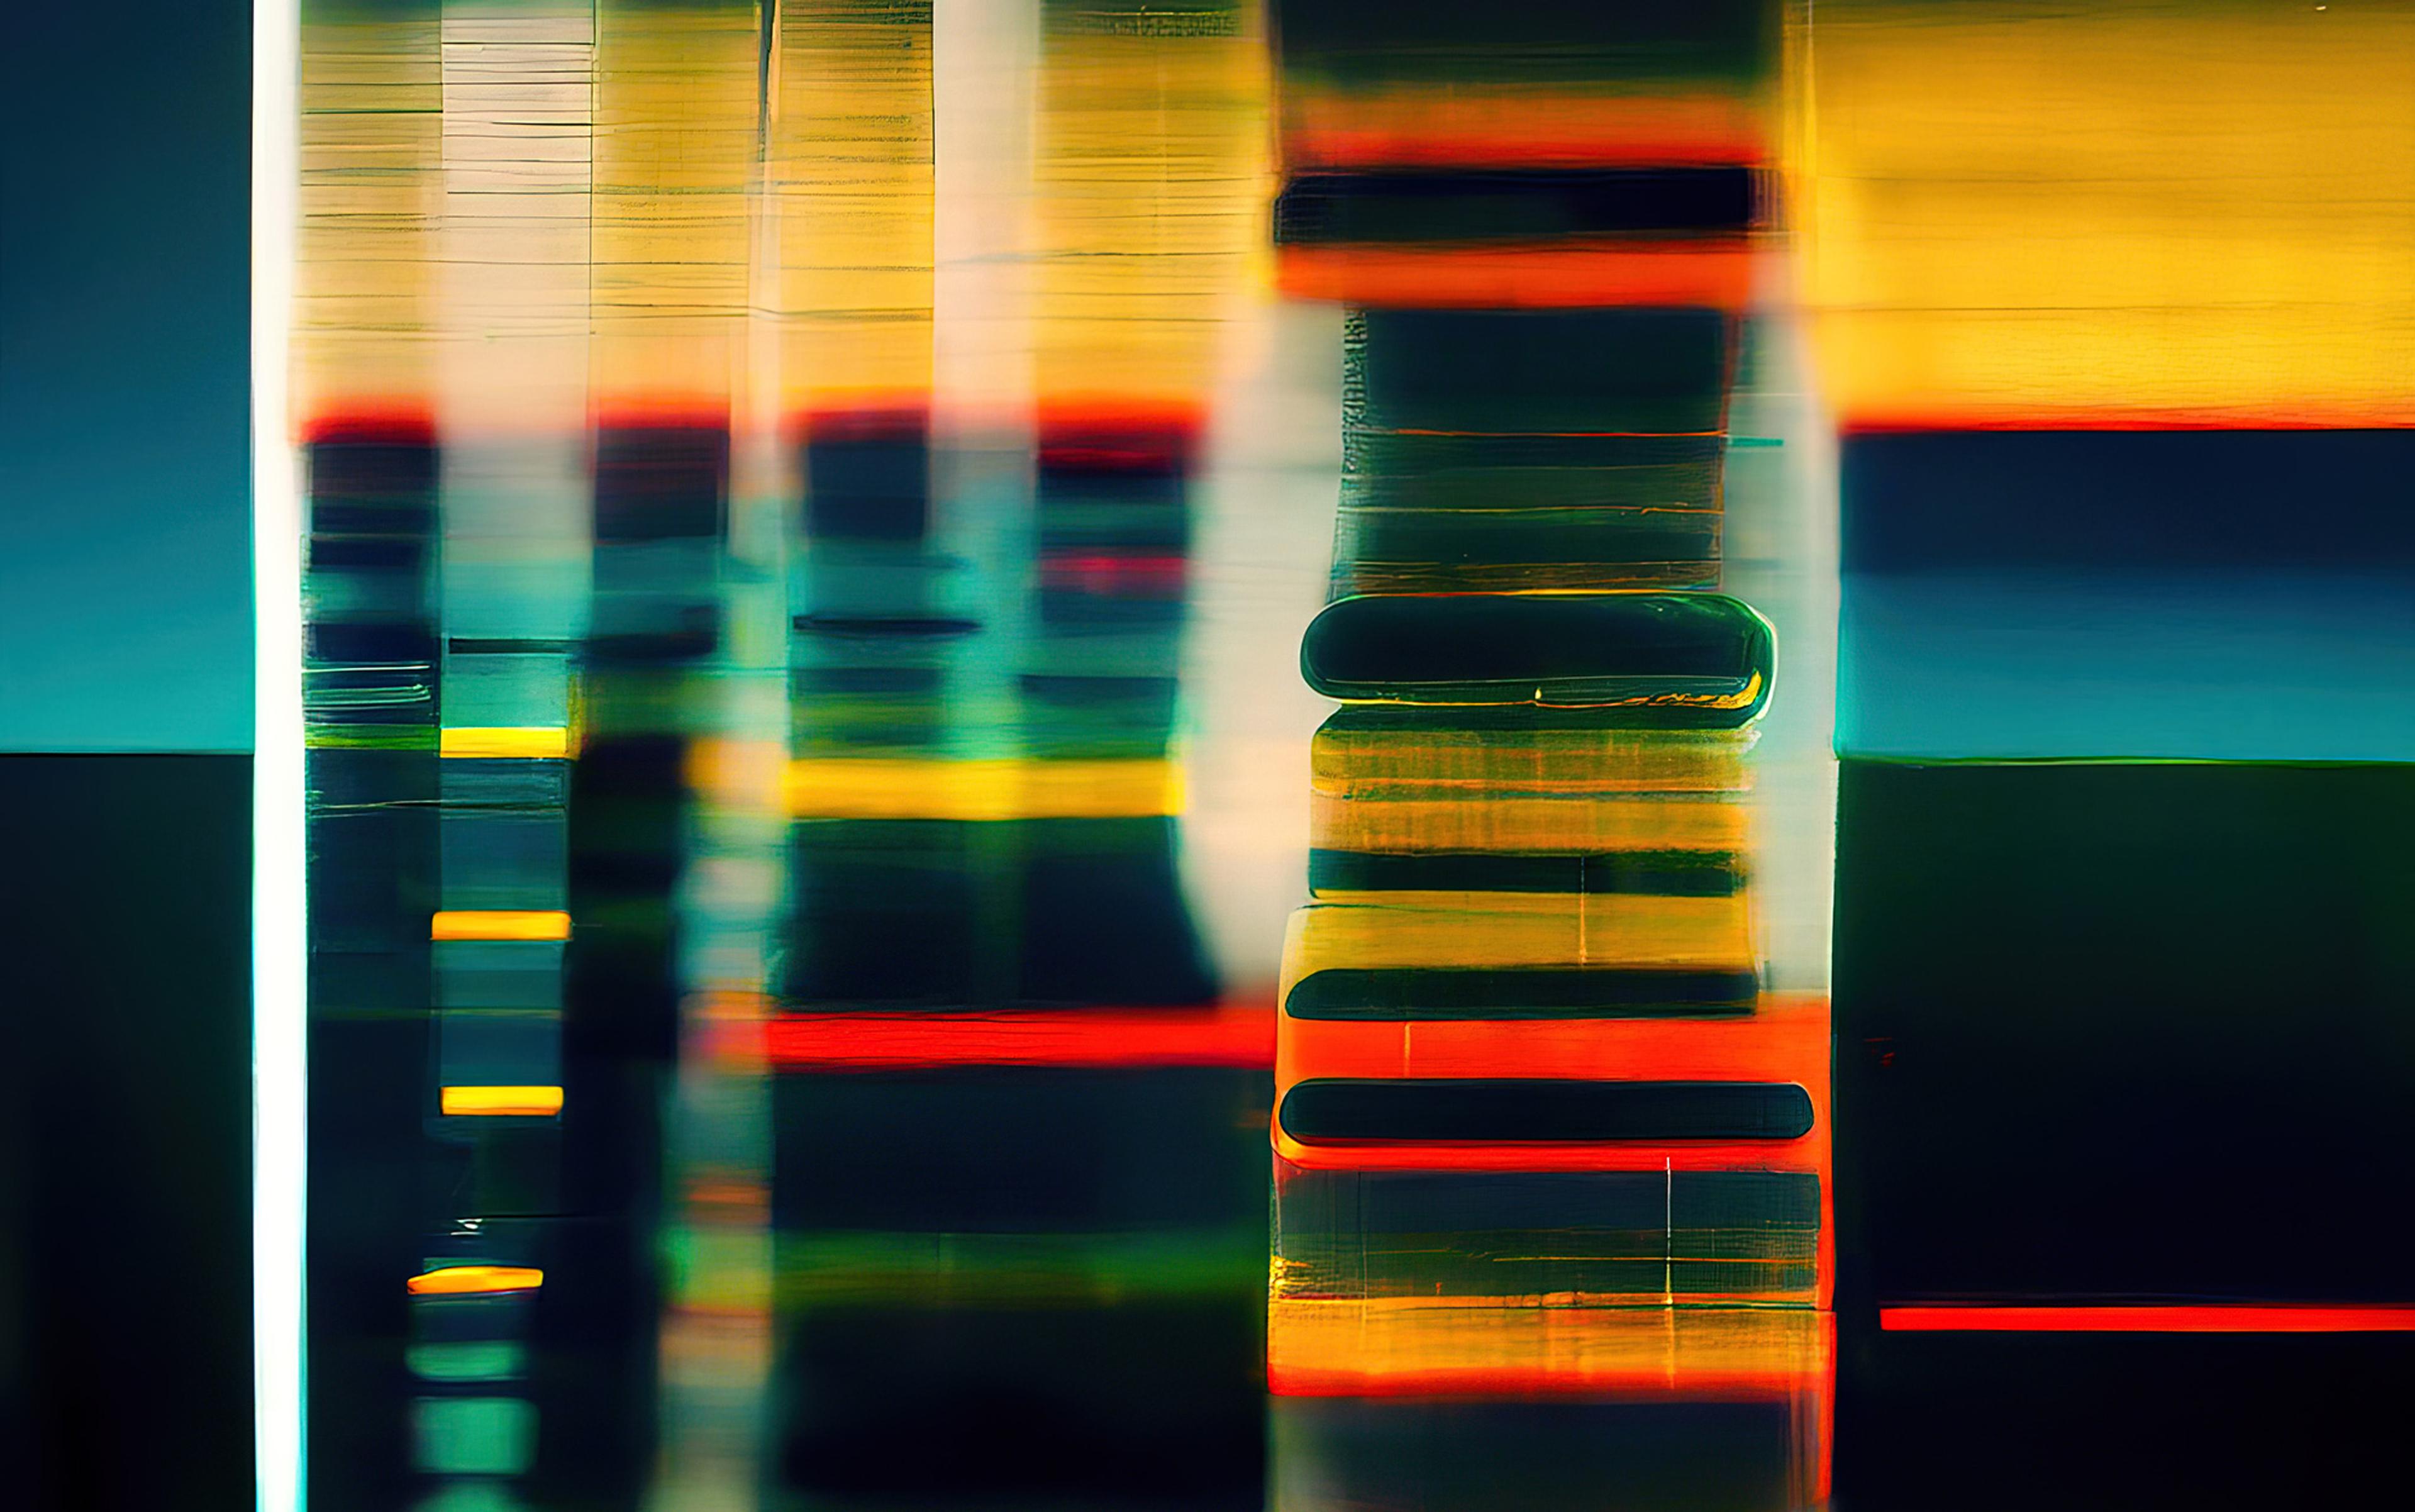 Abstract art depicting DNA sequencing, with vertical bands of vibrant colours including yellow, red, blue and green, blending into each other with a glossy, reflective texture.